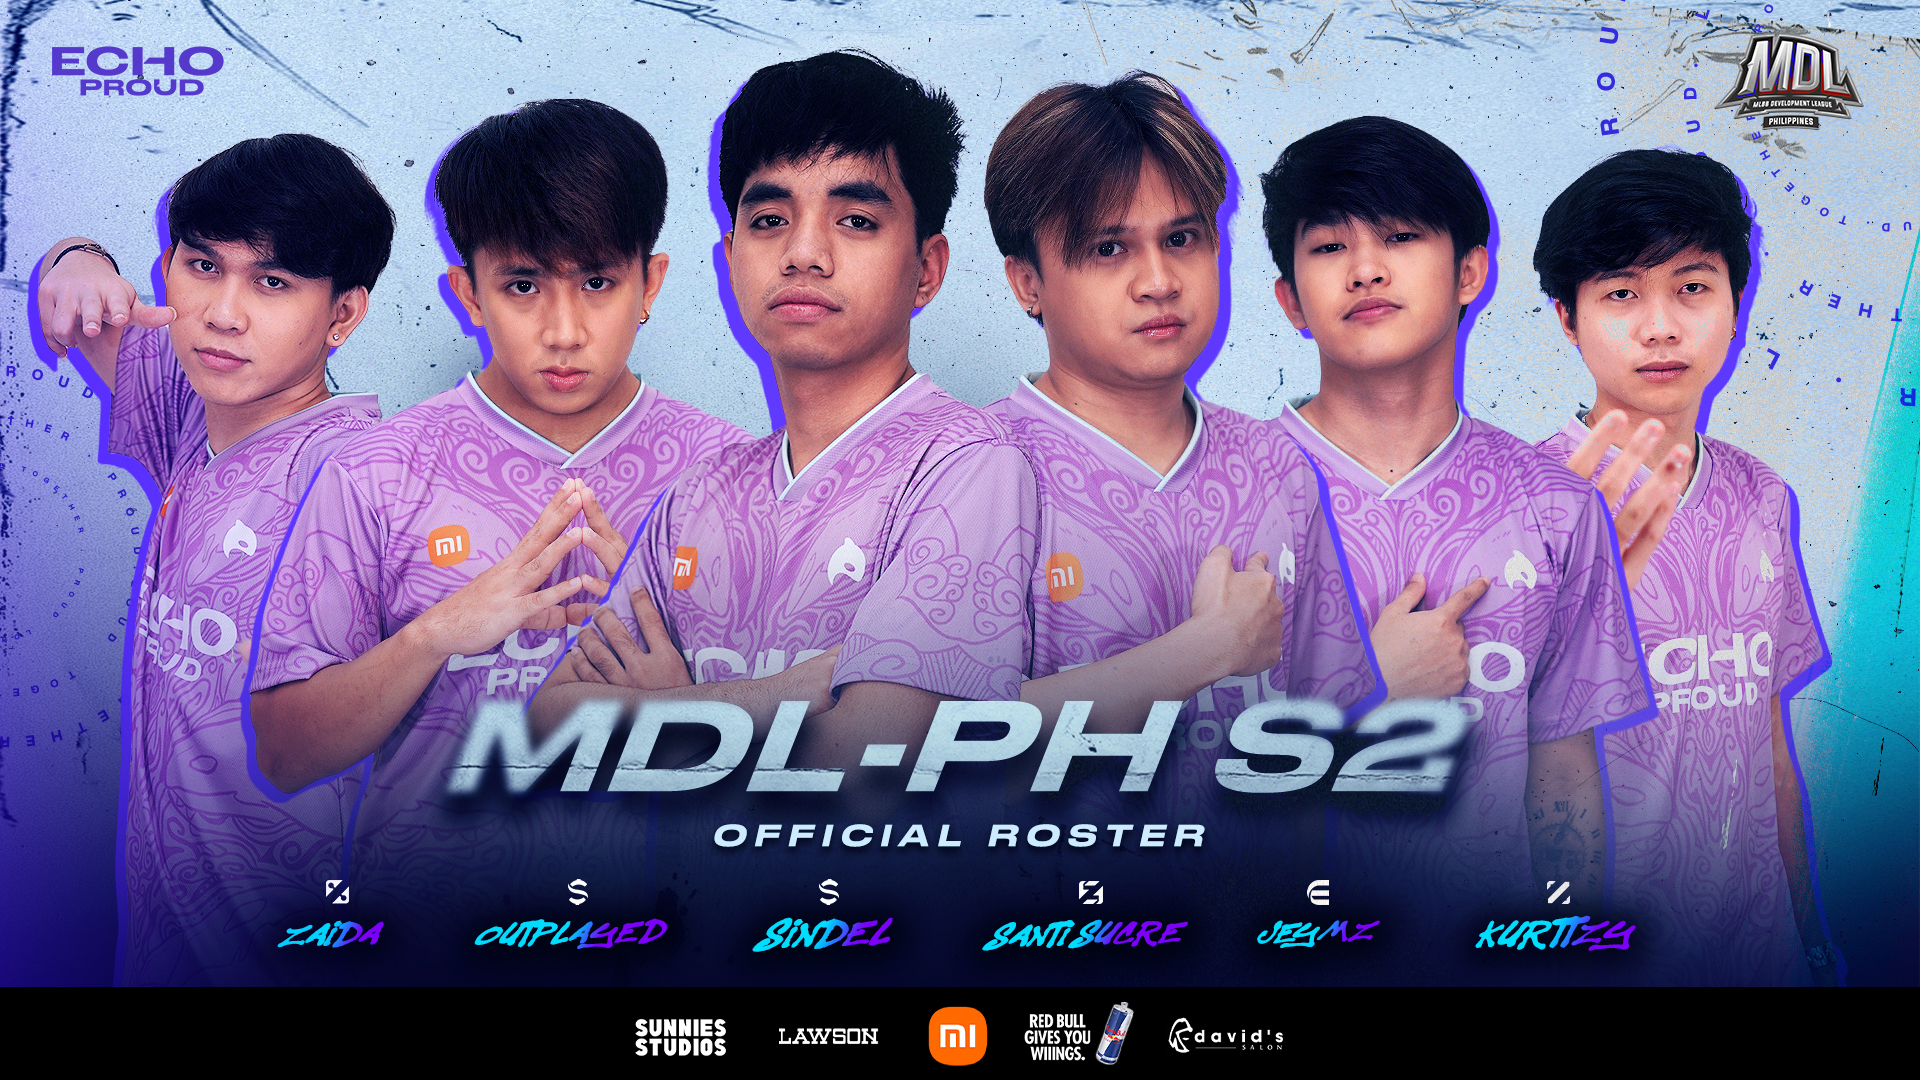 ECHO Proud have confirmed their roster for MDL PH Season 2. 